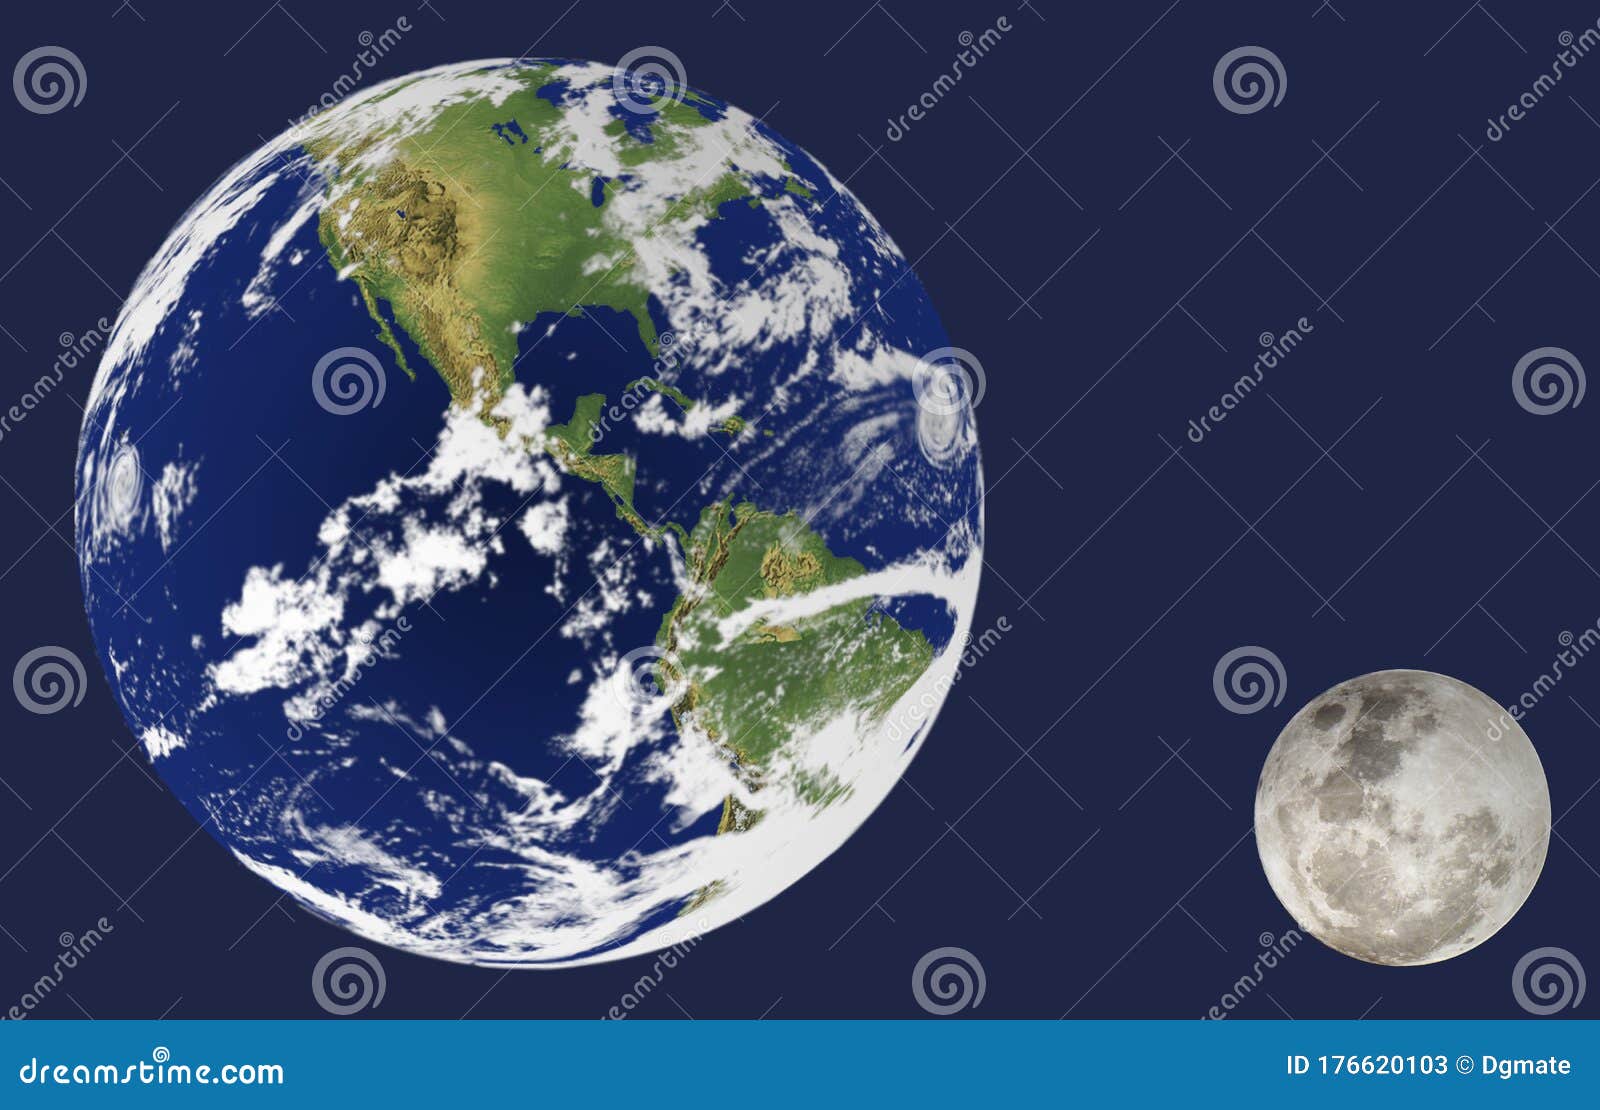 earth and moon, relative sizes